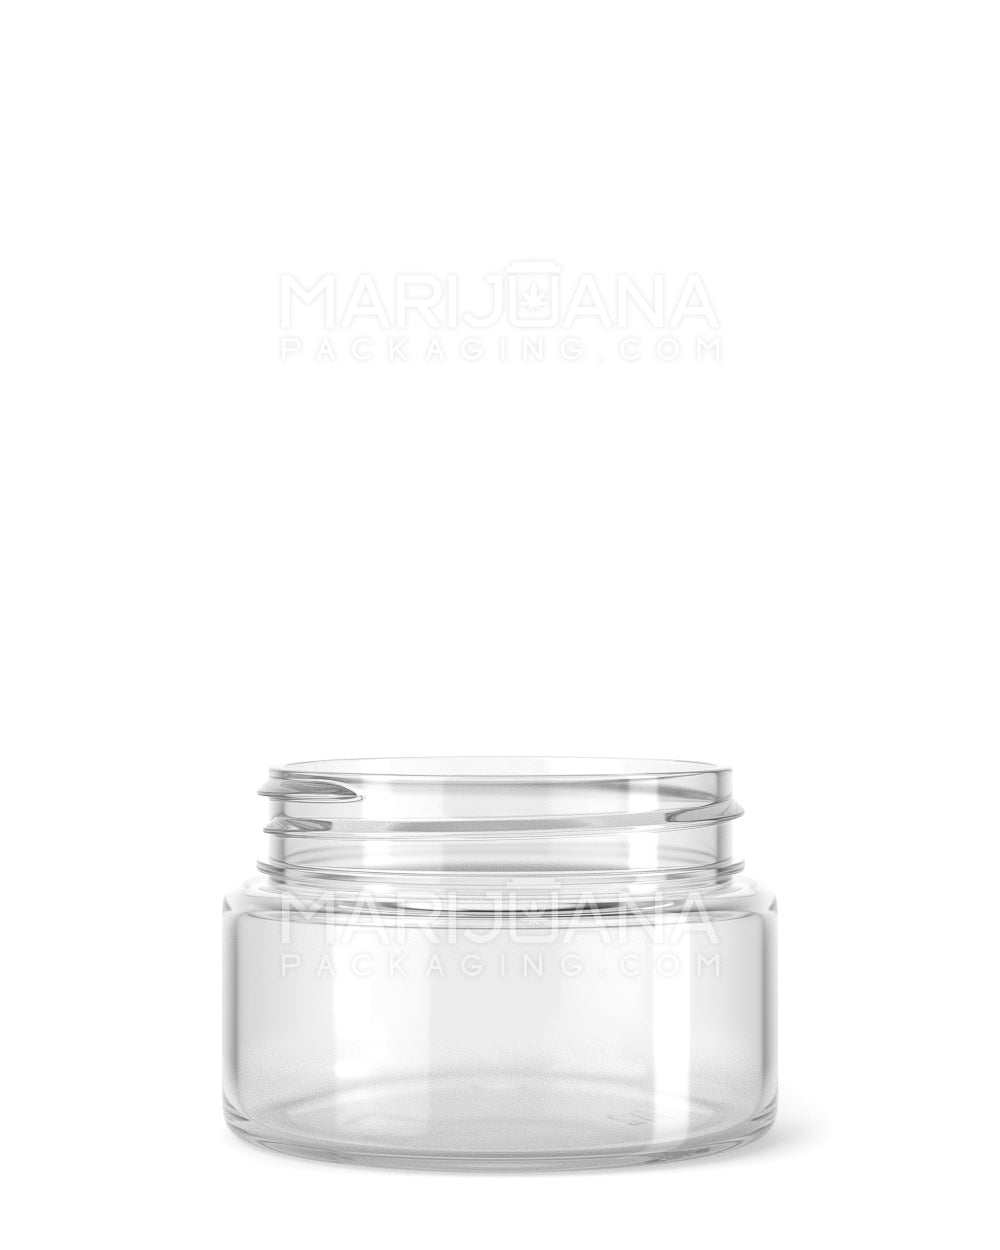 Straight Sided Clear Plastic Jars | 53mm - 2oz - 200 Count - 1